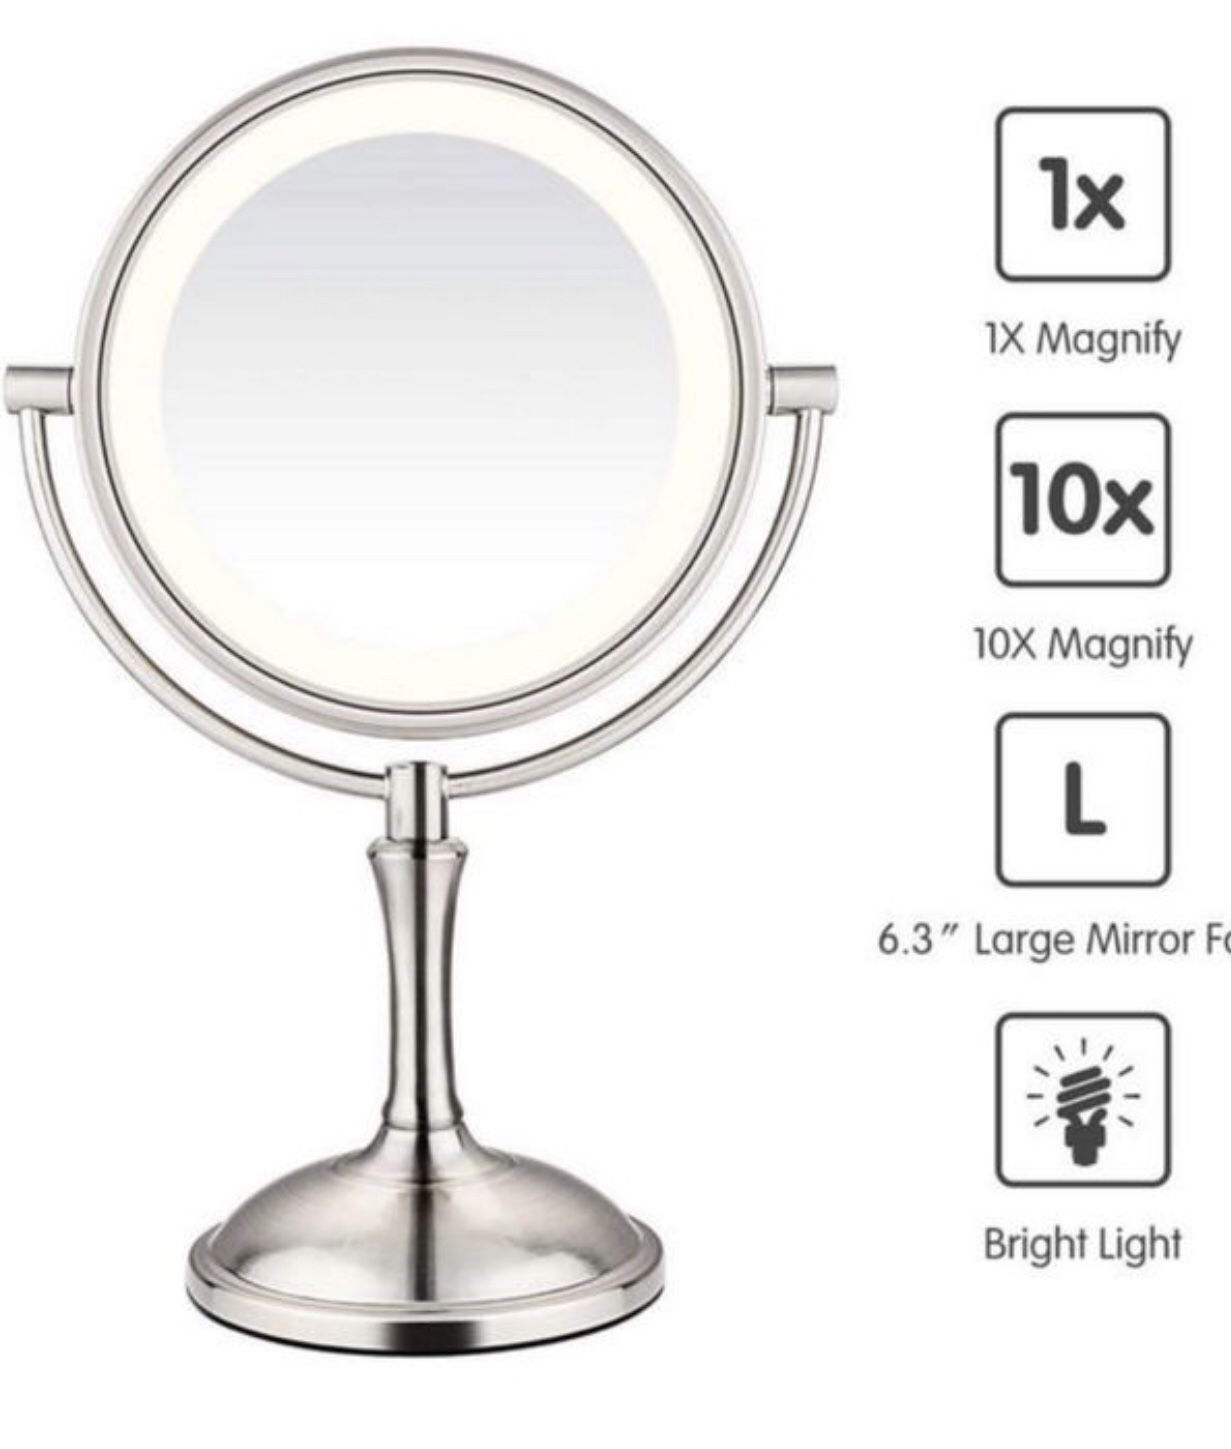 AmnoAmno LED Makeup Mirror-10x Magnifying,7.8" Double Sided Lighted Vanity Makeup Mirror with Stand, Touch Button Adjustable Light-Cord or